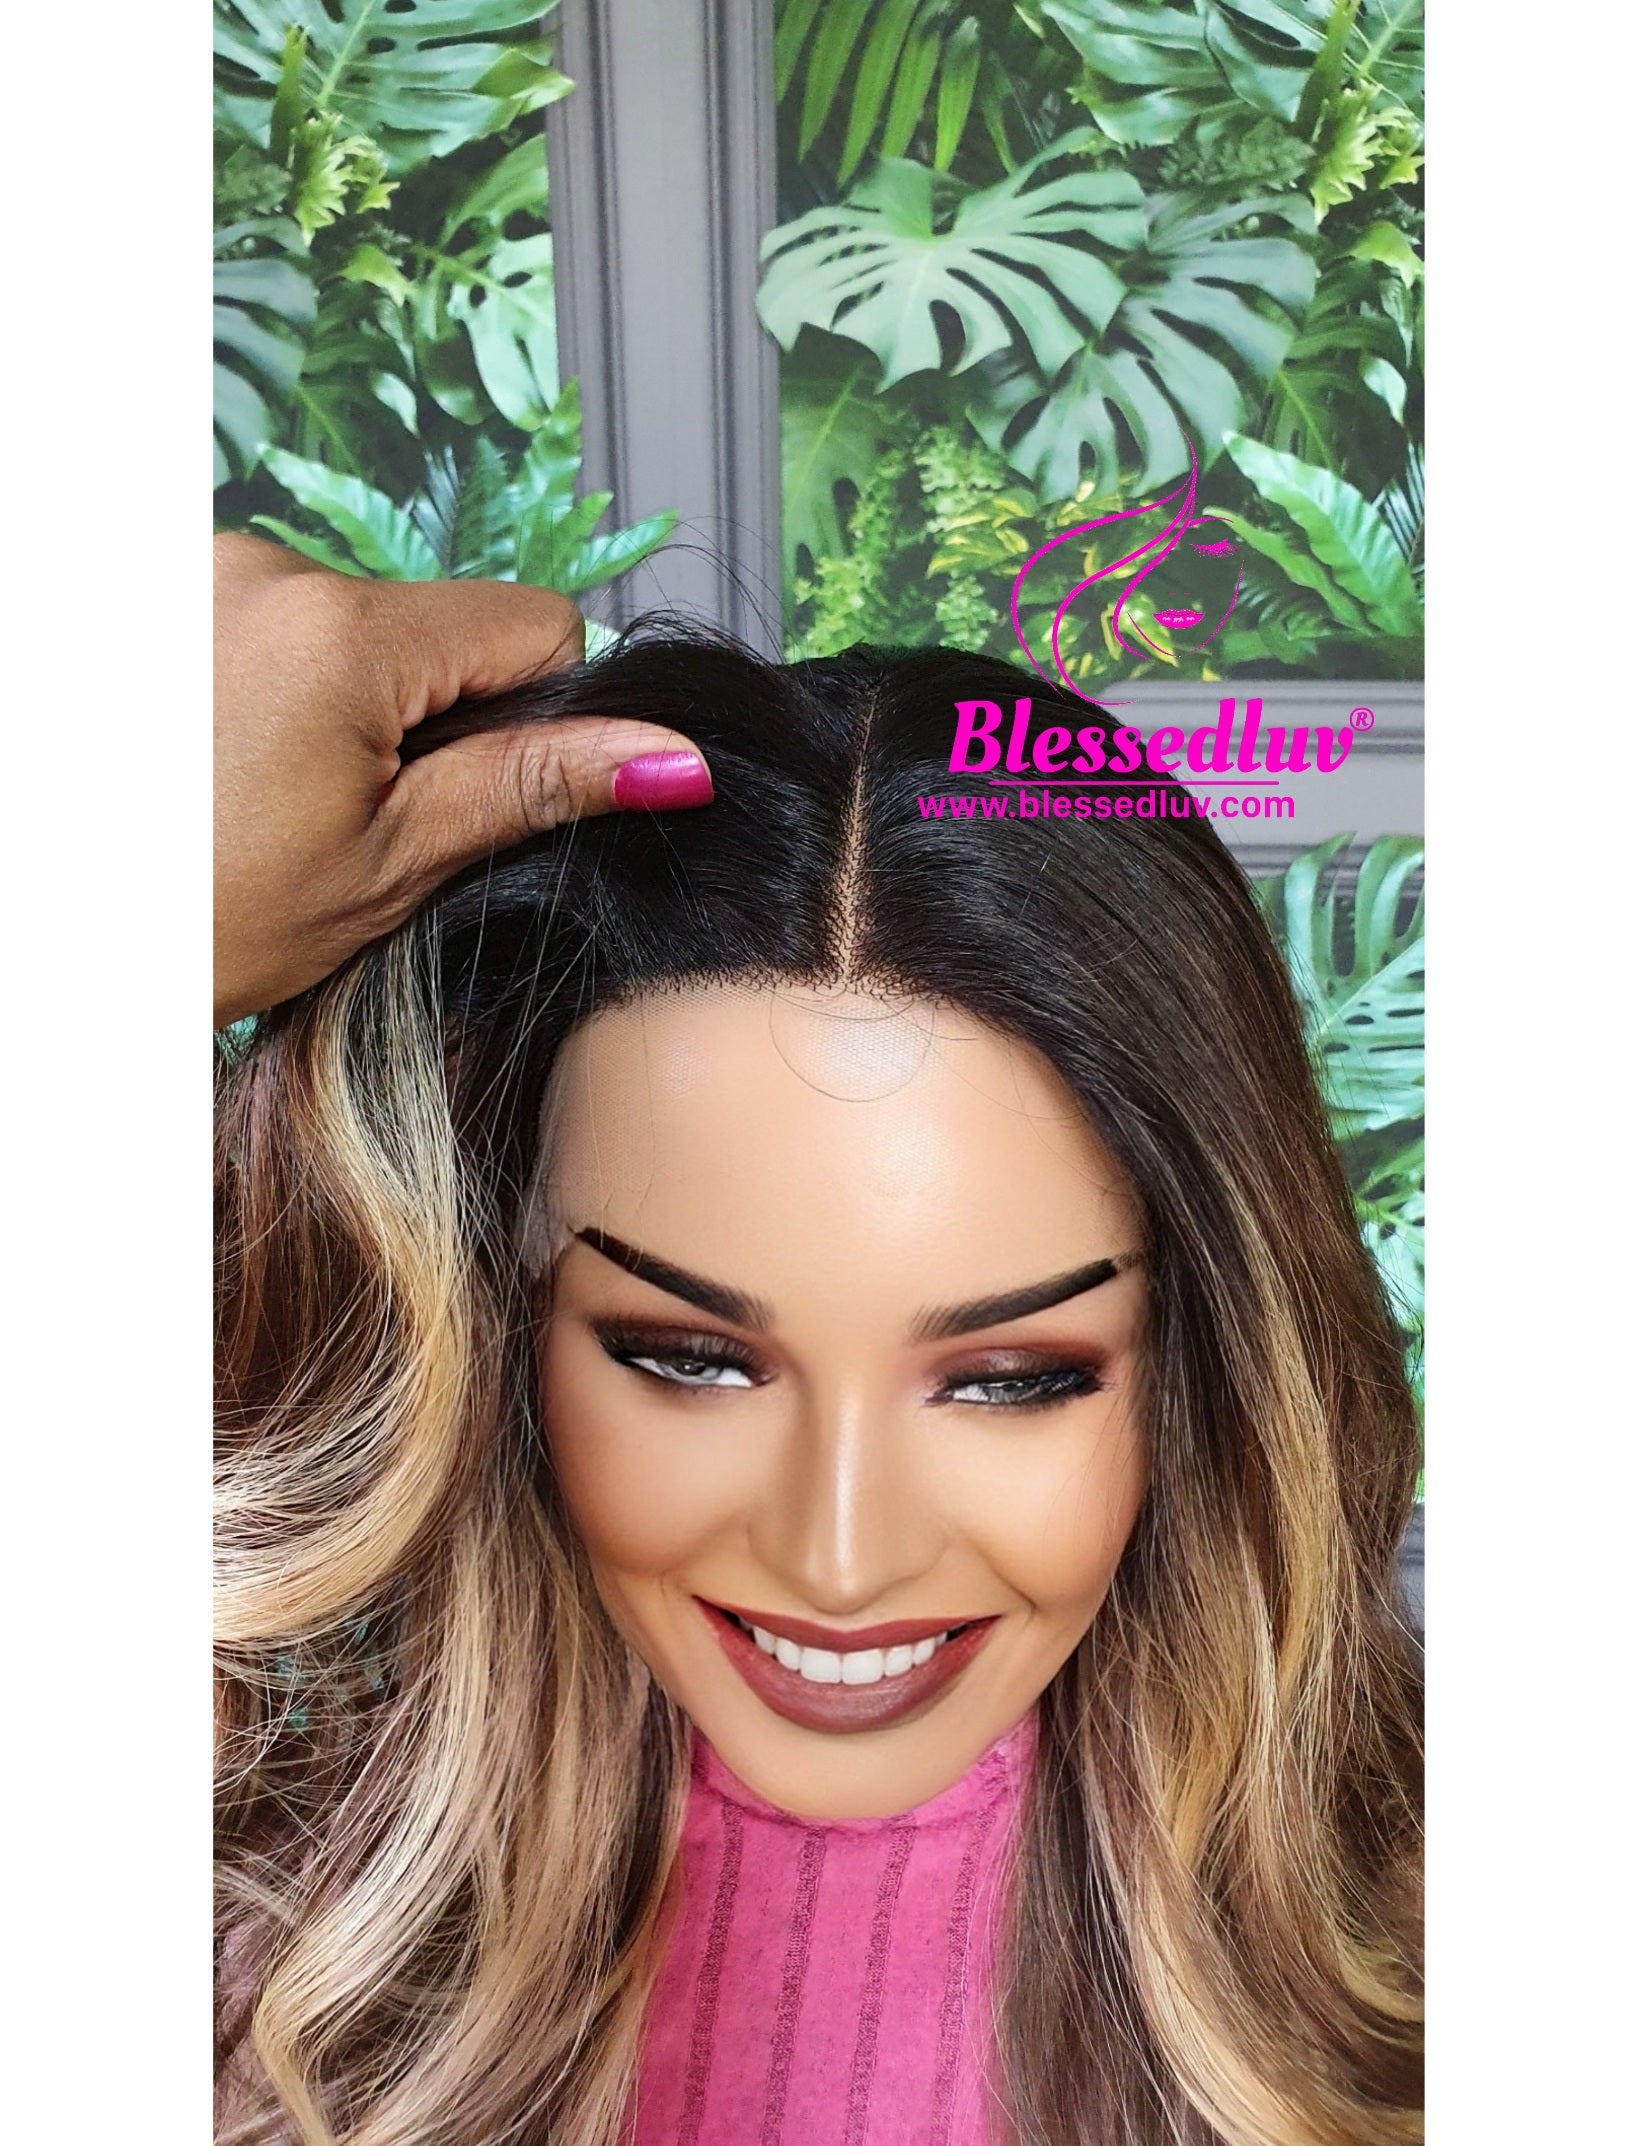 Zara - Synthetic Ombré Balayage Lace Front Wig-Wigs-www.blessedluv.com-Brazilianweave.com